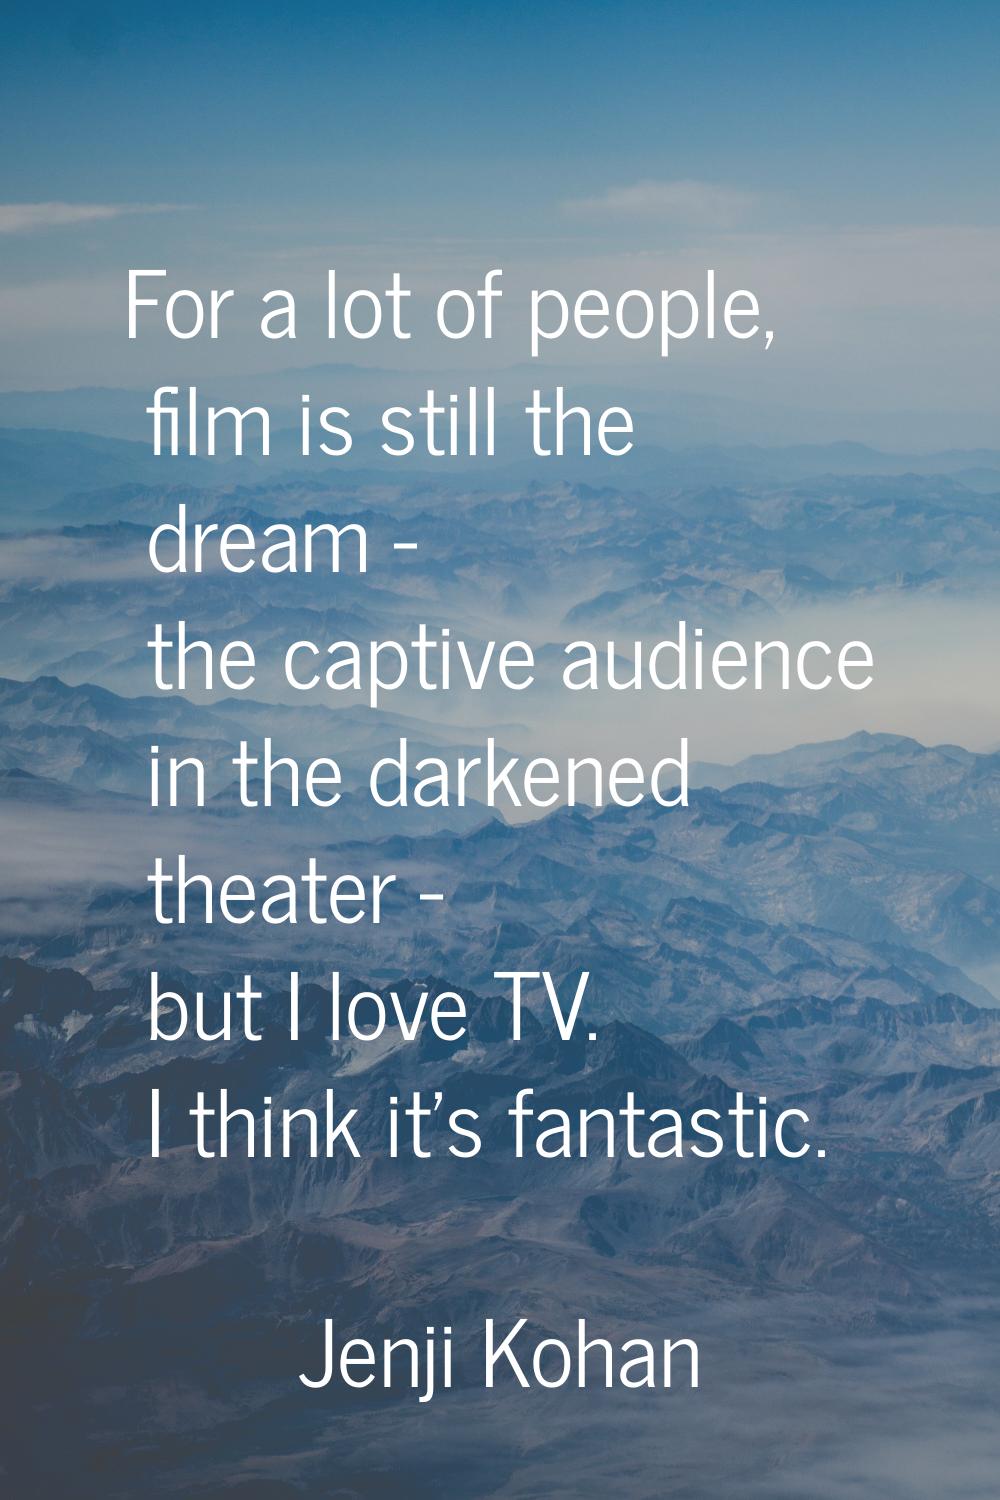 For a lot of people, film is still the dream - the captive audience in the darkened theater - but I